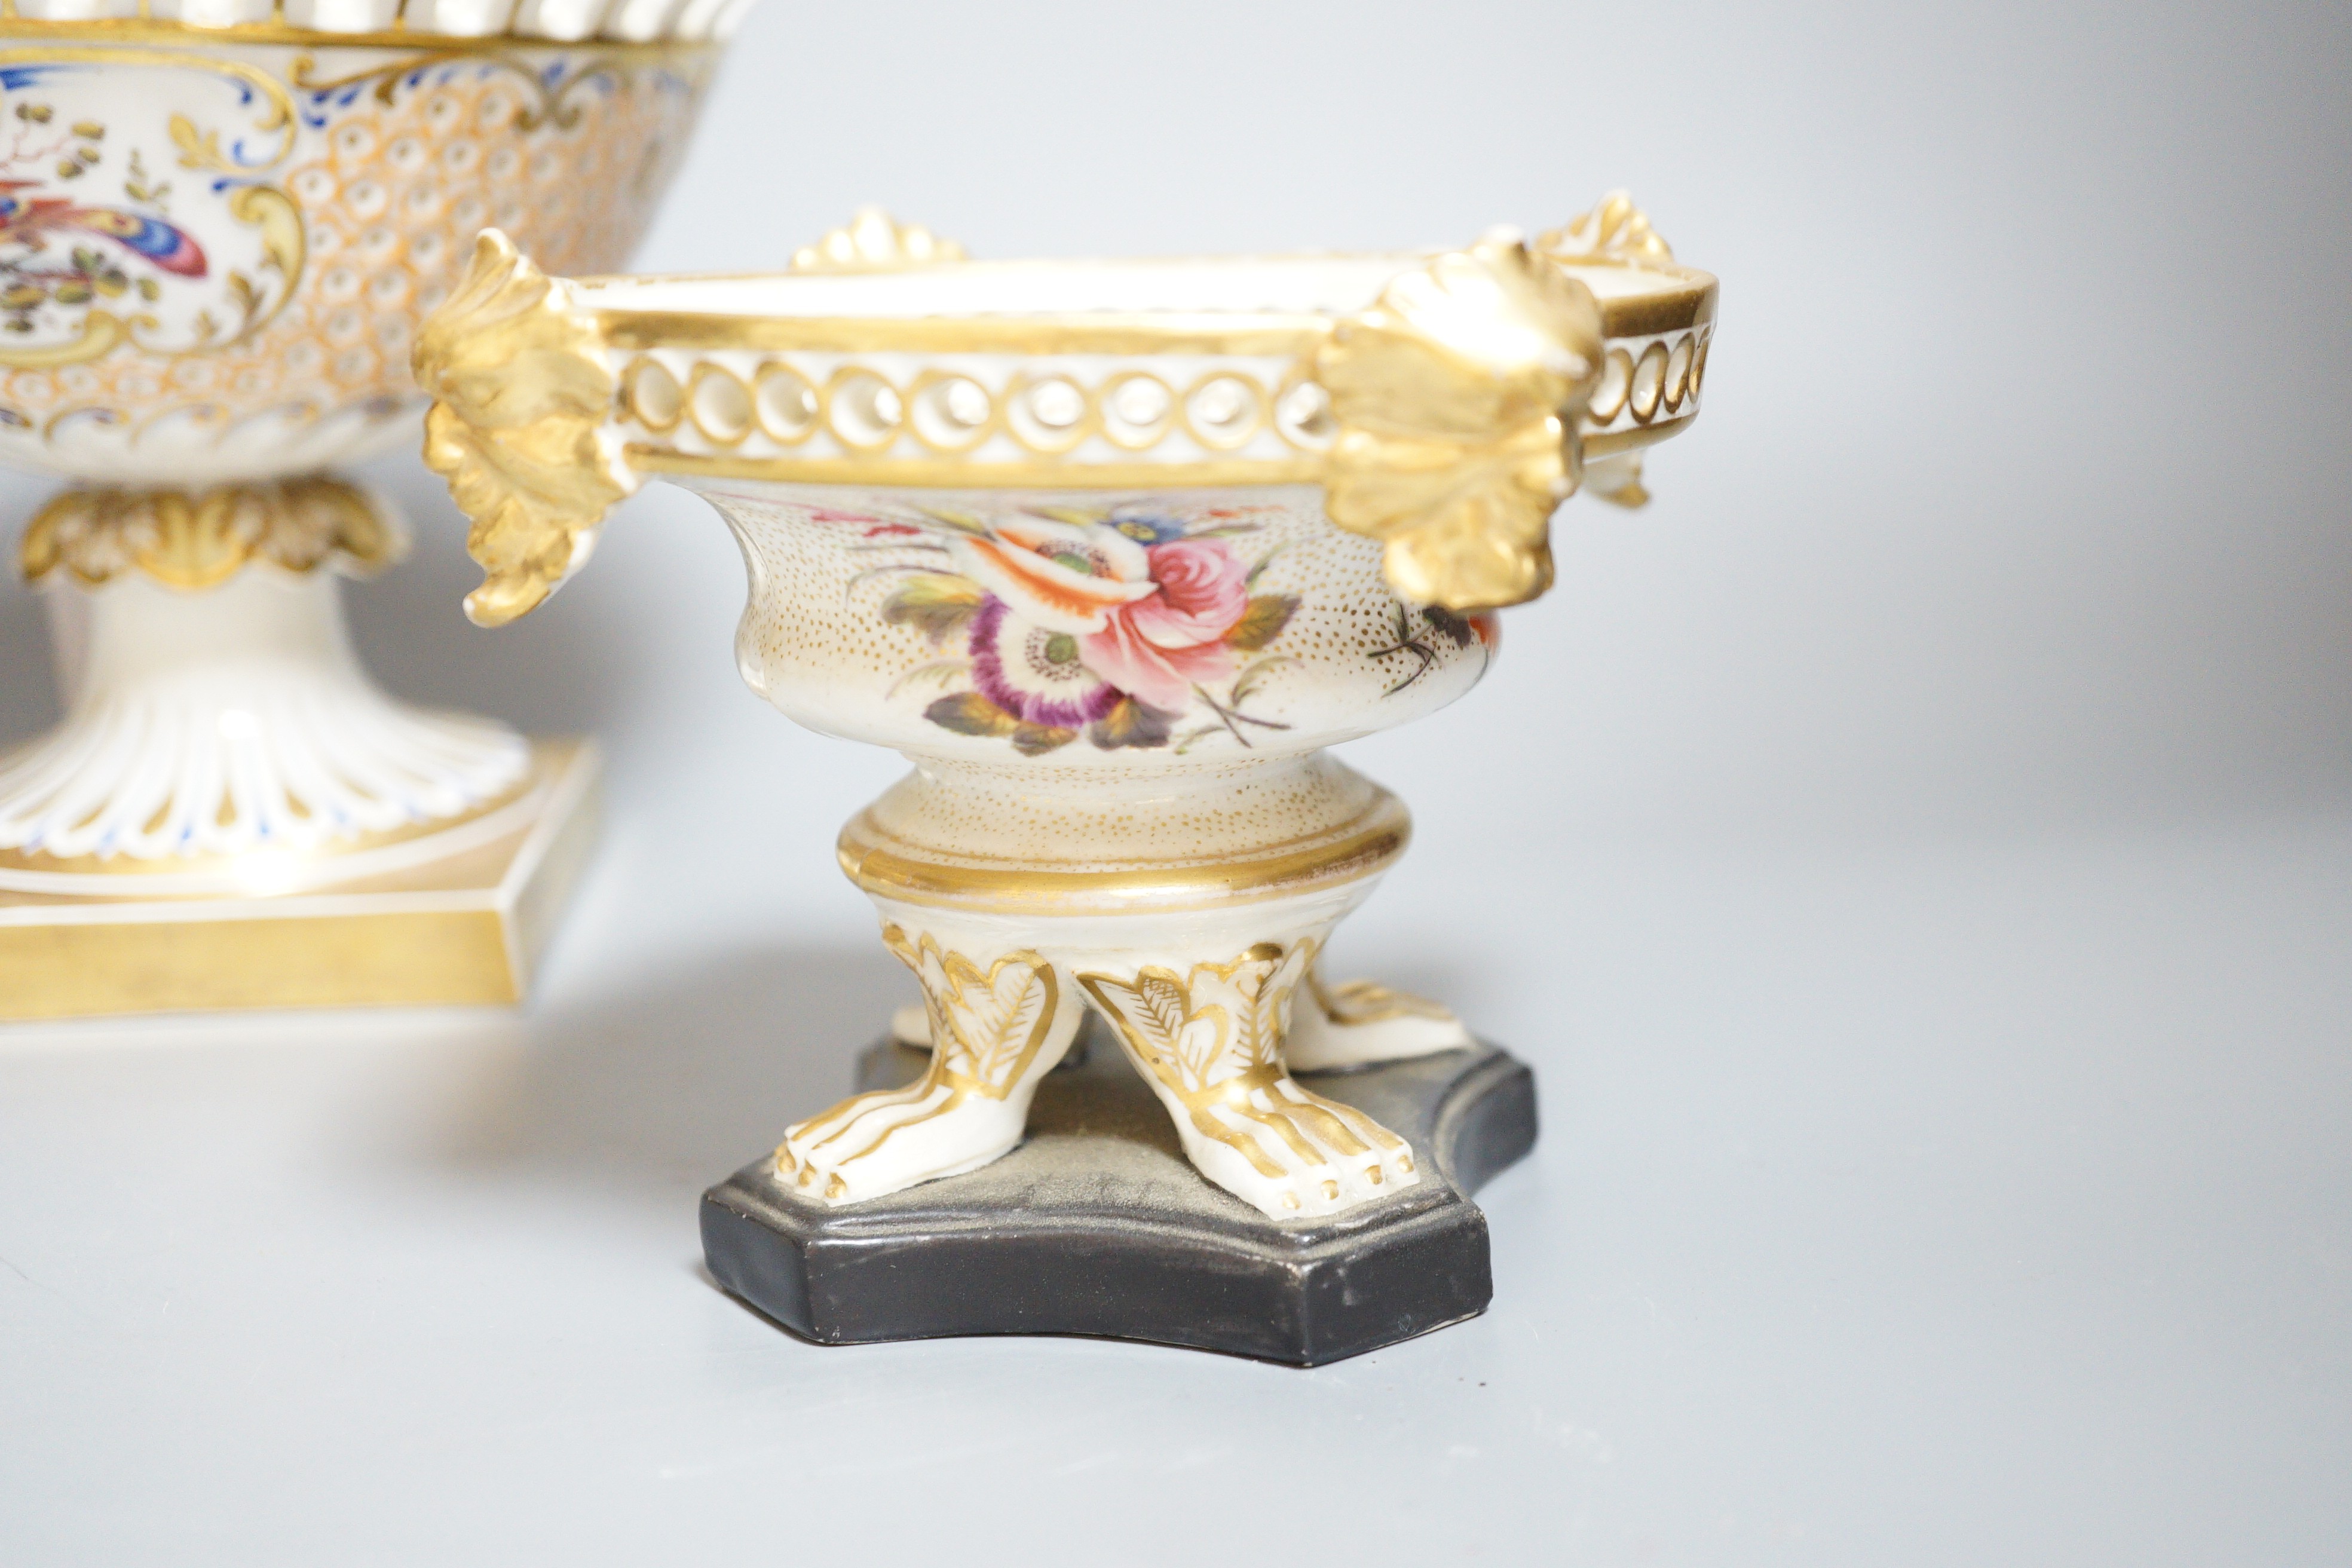 A pair of 19th century continental porcelain tazzas together with a smaller example and planter (4), tallest 19cm